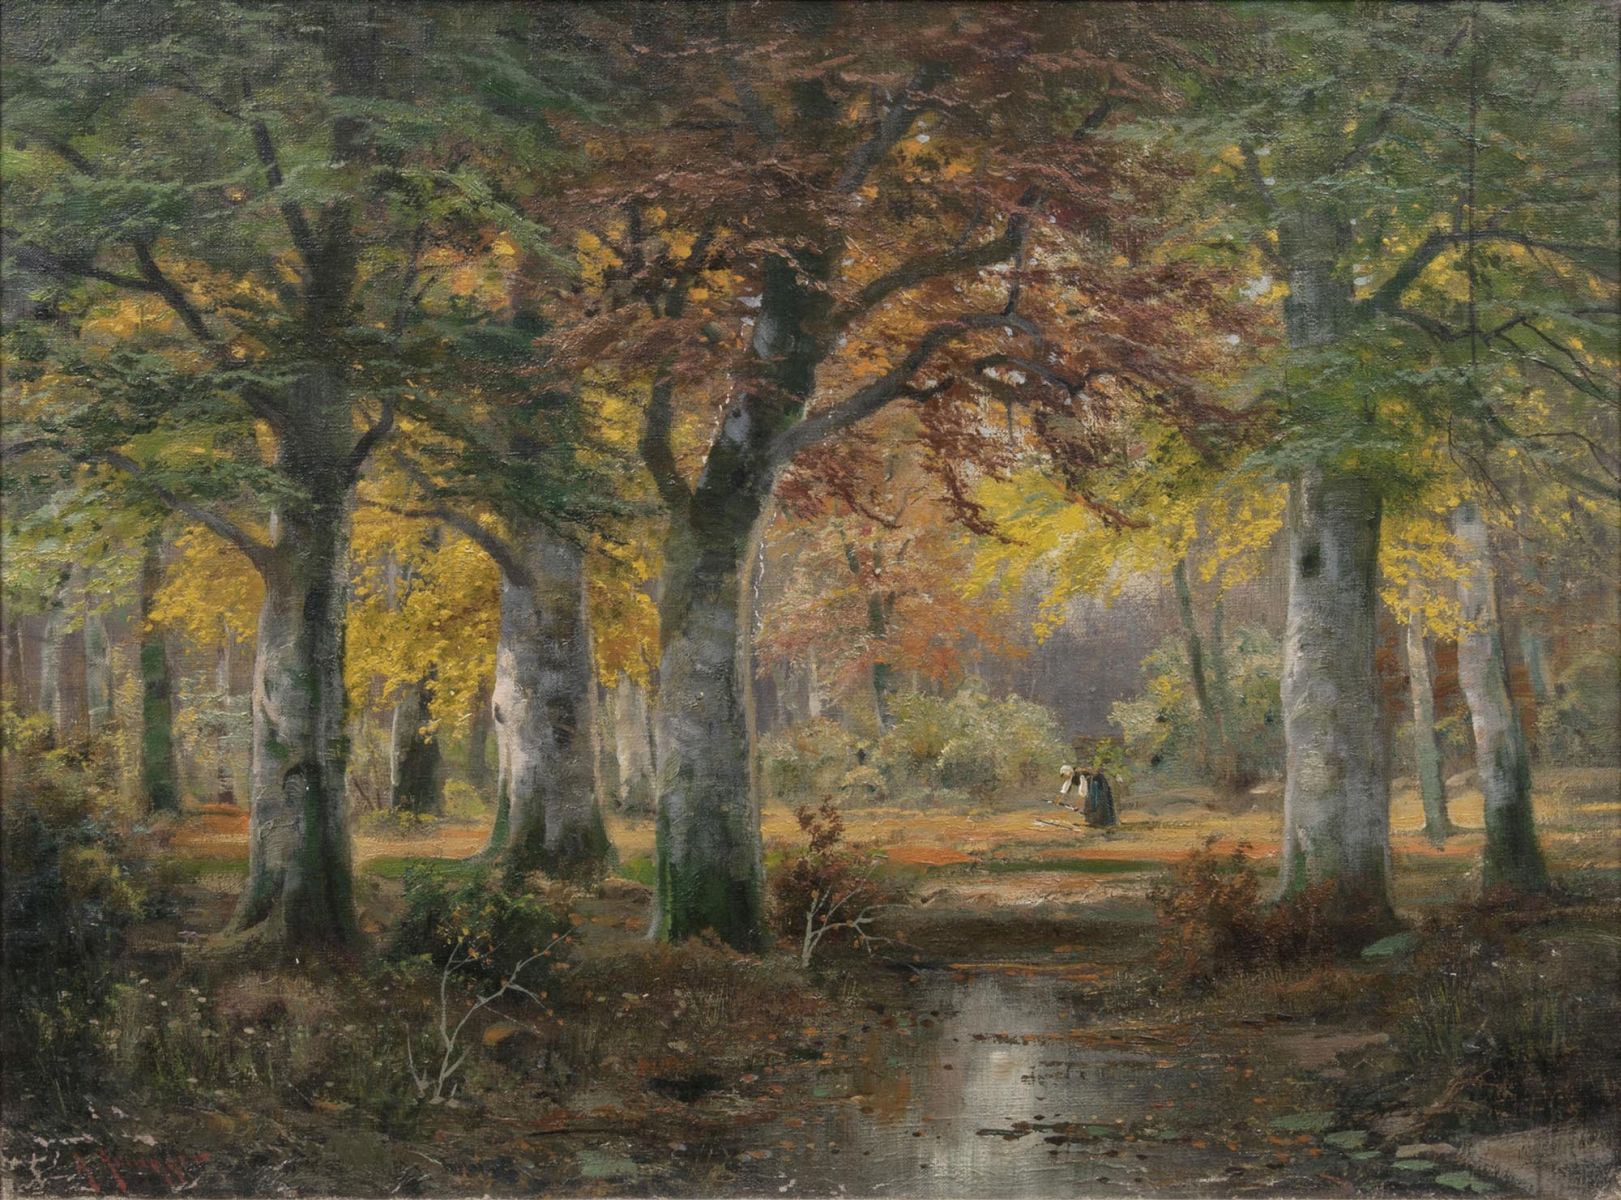 Collector of brushwood in autumn forest